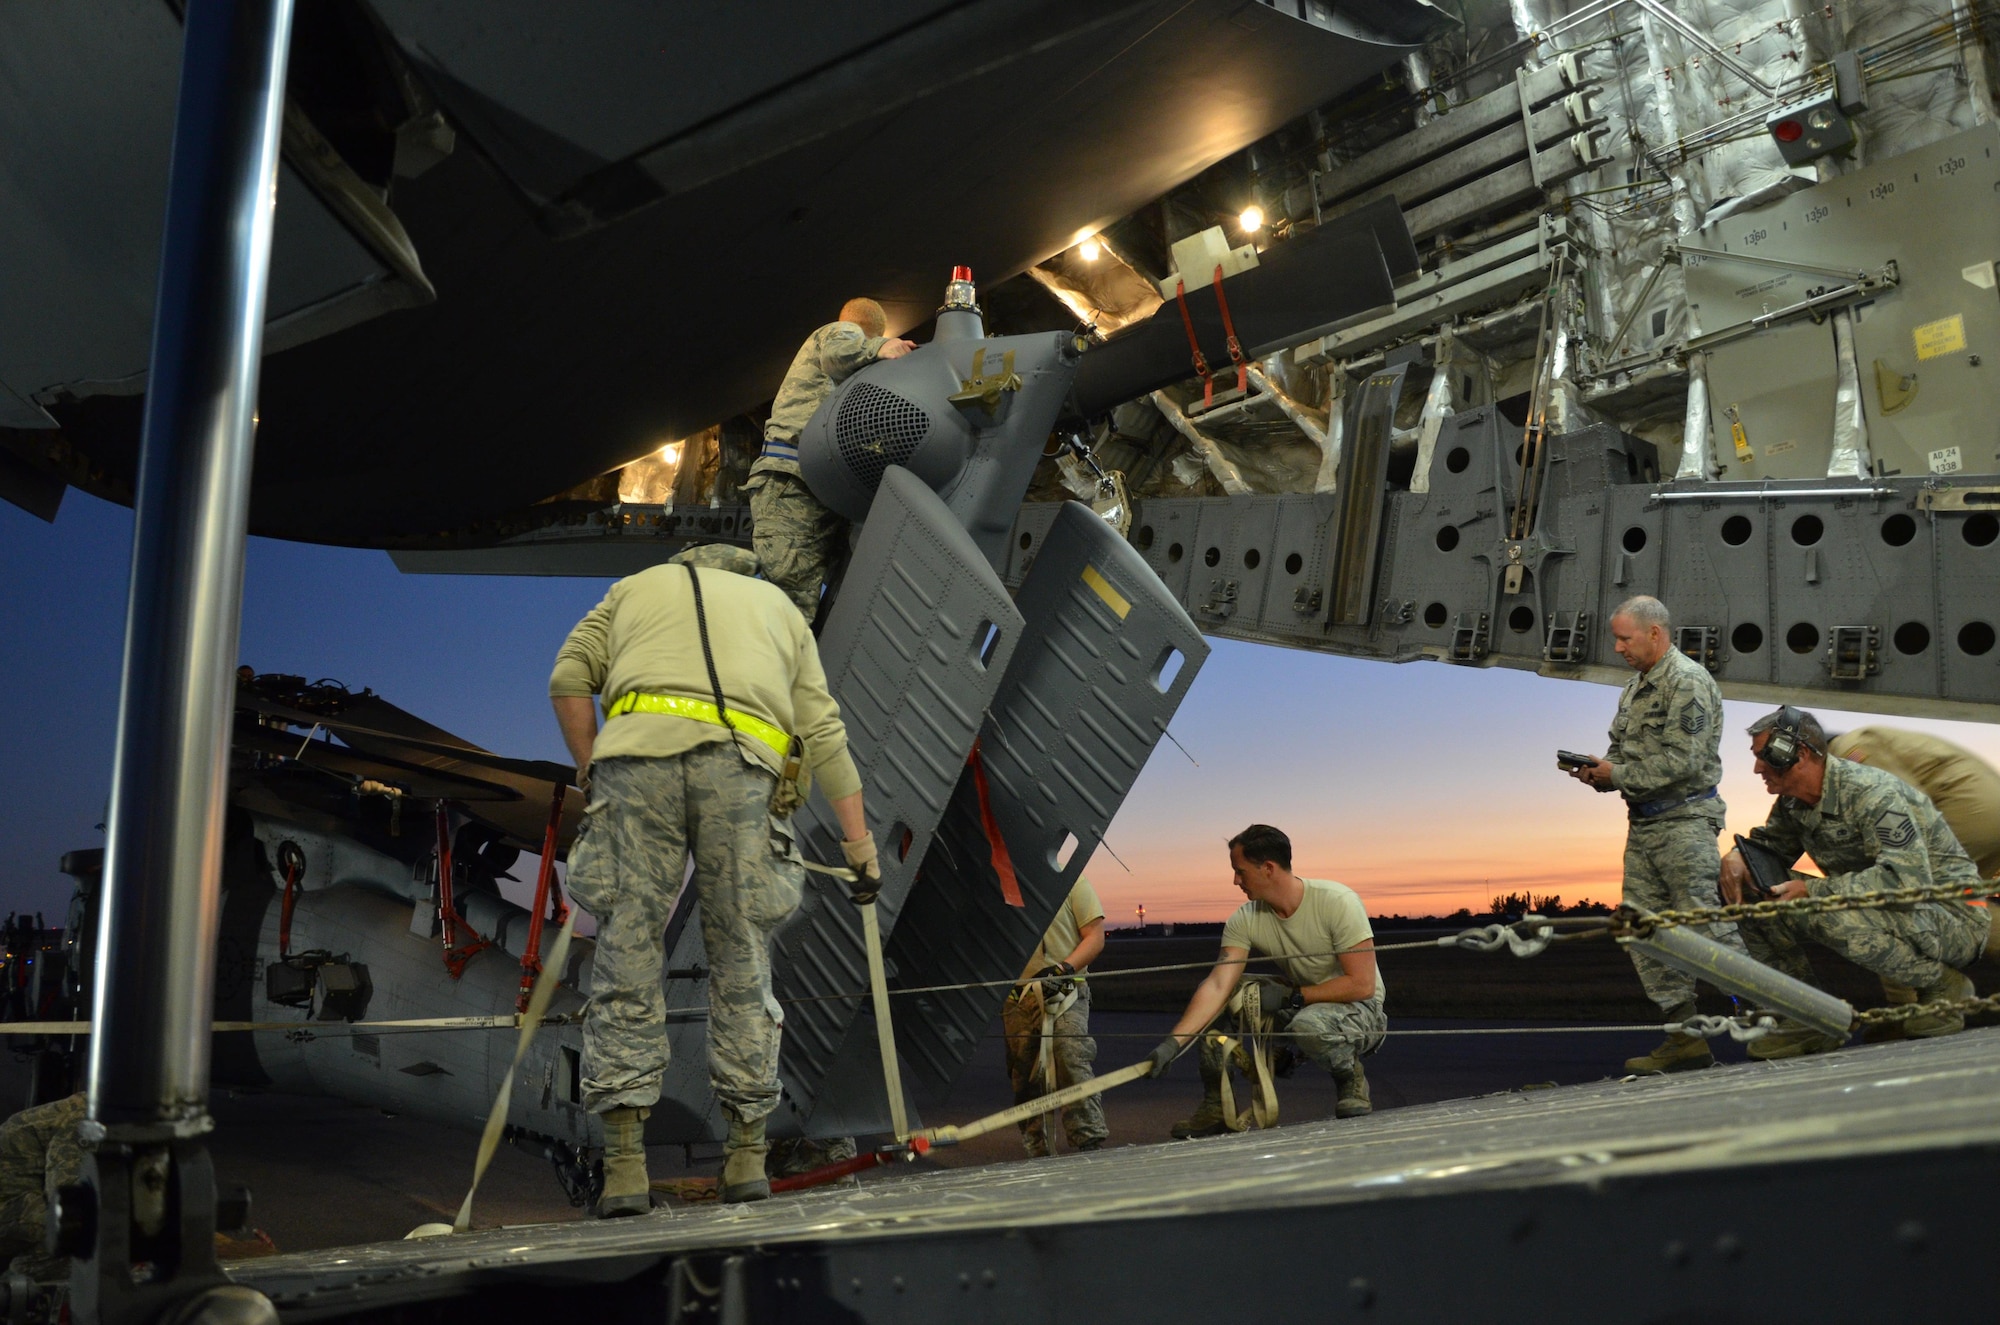 To ensure the flying safety of Air Force choppers used to save lives in combat, maintenance crews from the 920th Rescue Wing swap out an HH-60G Pave Hawk helicopter for reconditioning January 25, 2017. A team of 10 maintainers is necessary to skillfully muscle the metal warrior into the cargo bay however, more often join the unique event for hands-on training and to secure the warrior on a smooth journey over an ocean and a continent to trade places with the combat-weary aircraft. (U.S. Air Force photo/Maj. Cathleen Snow)
